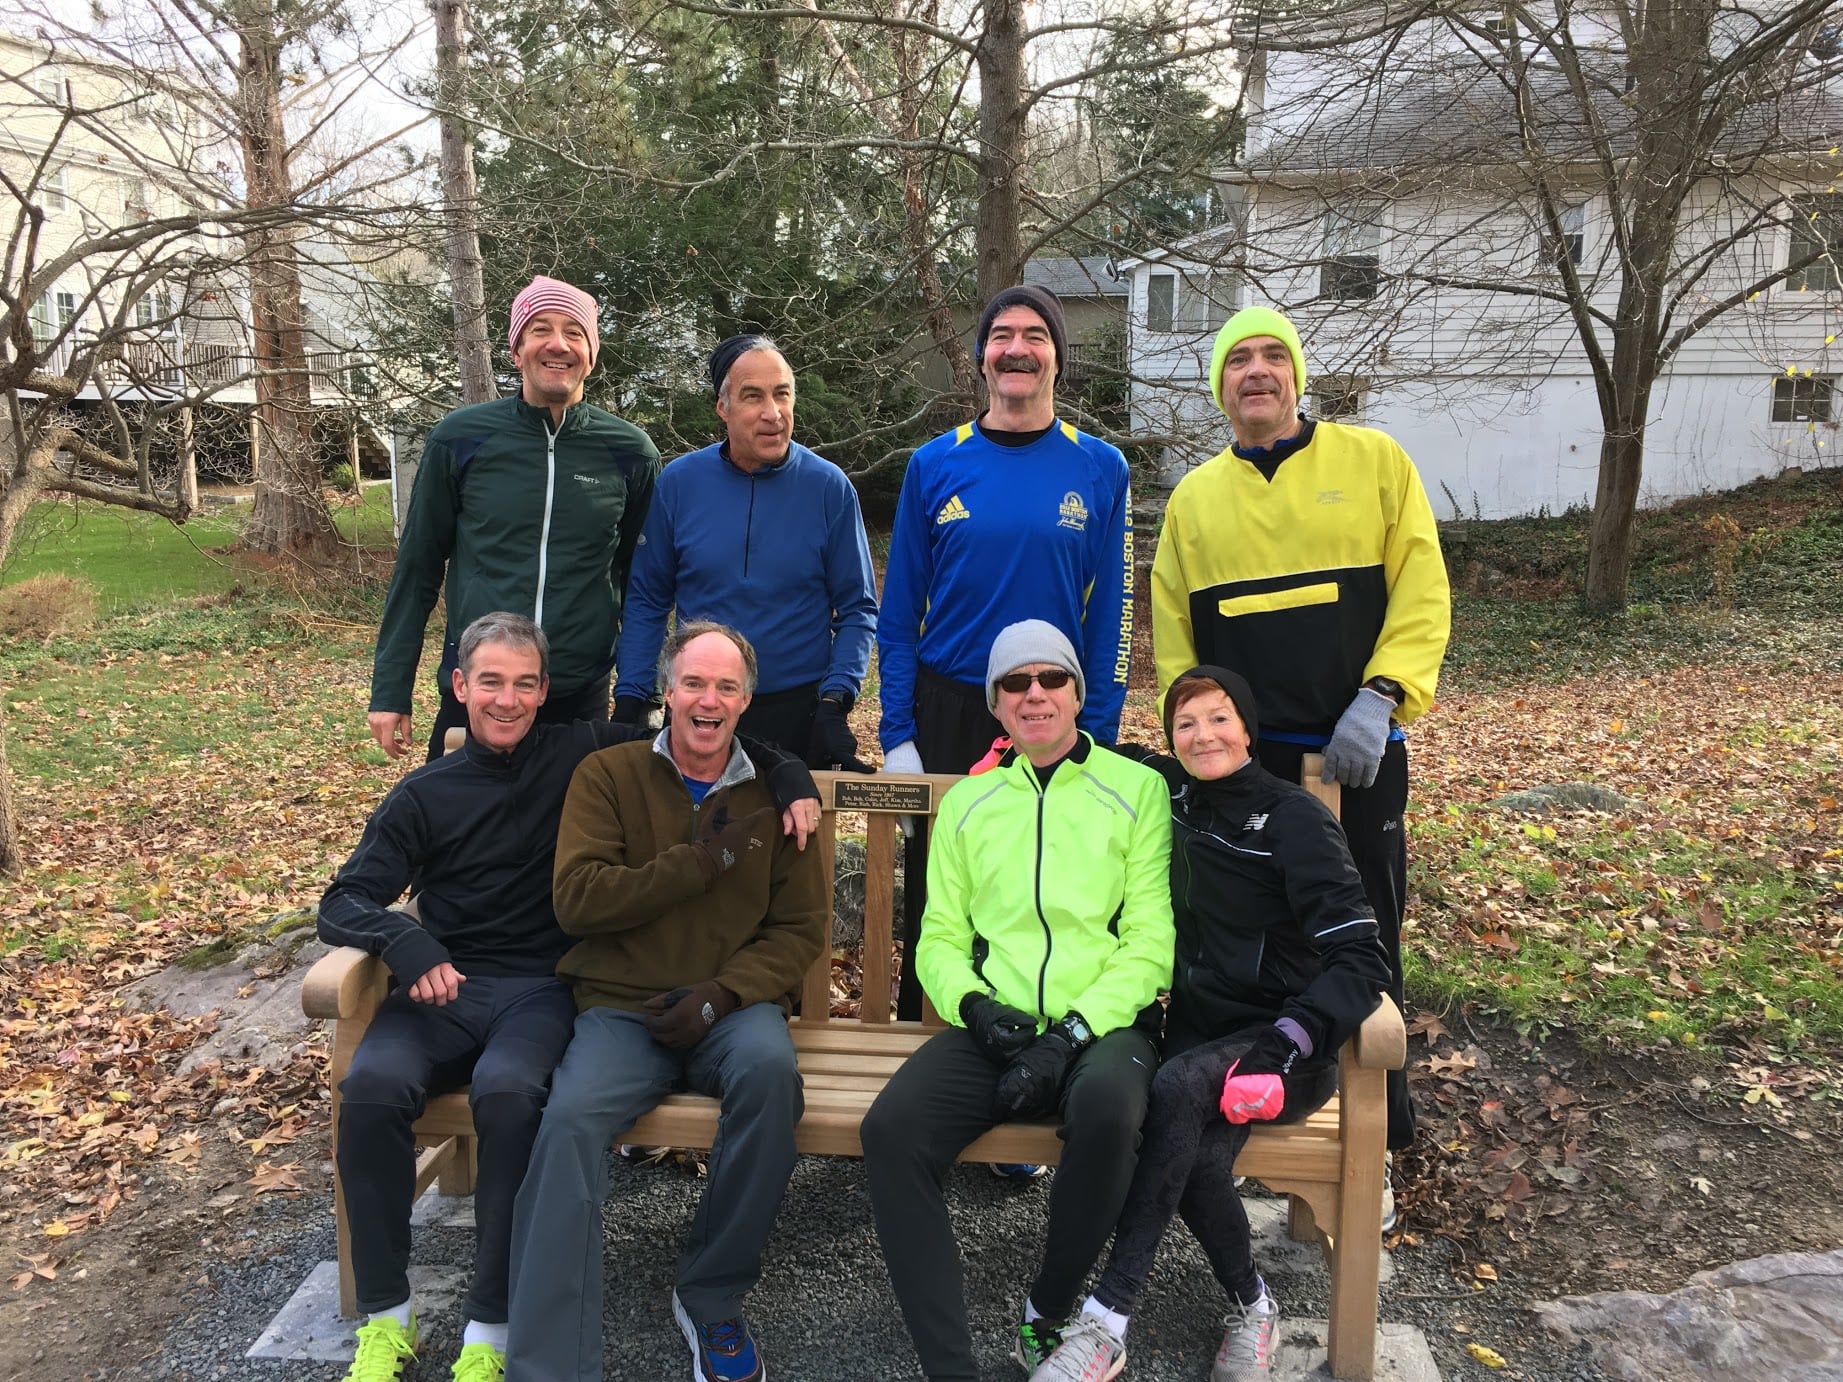 The Sunday Runners, Wellesley